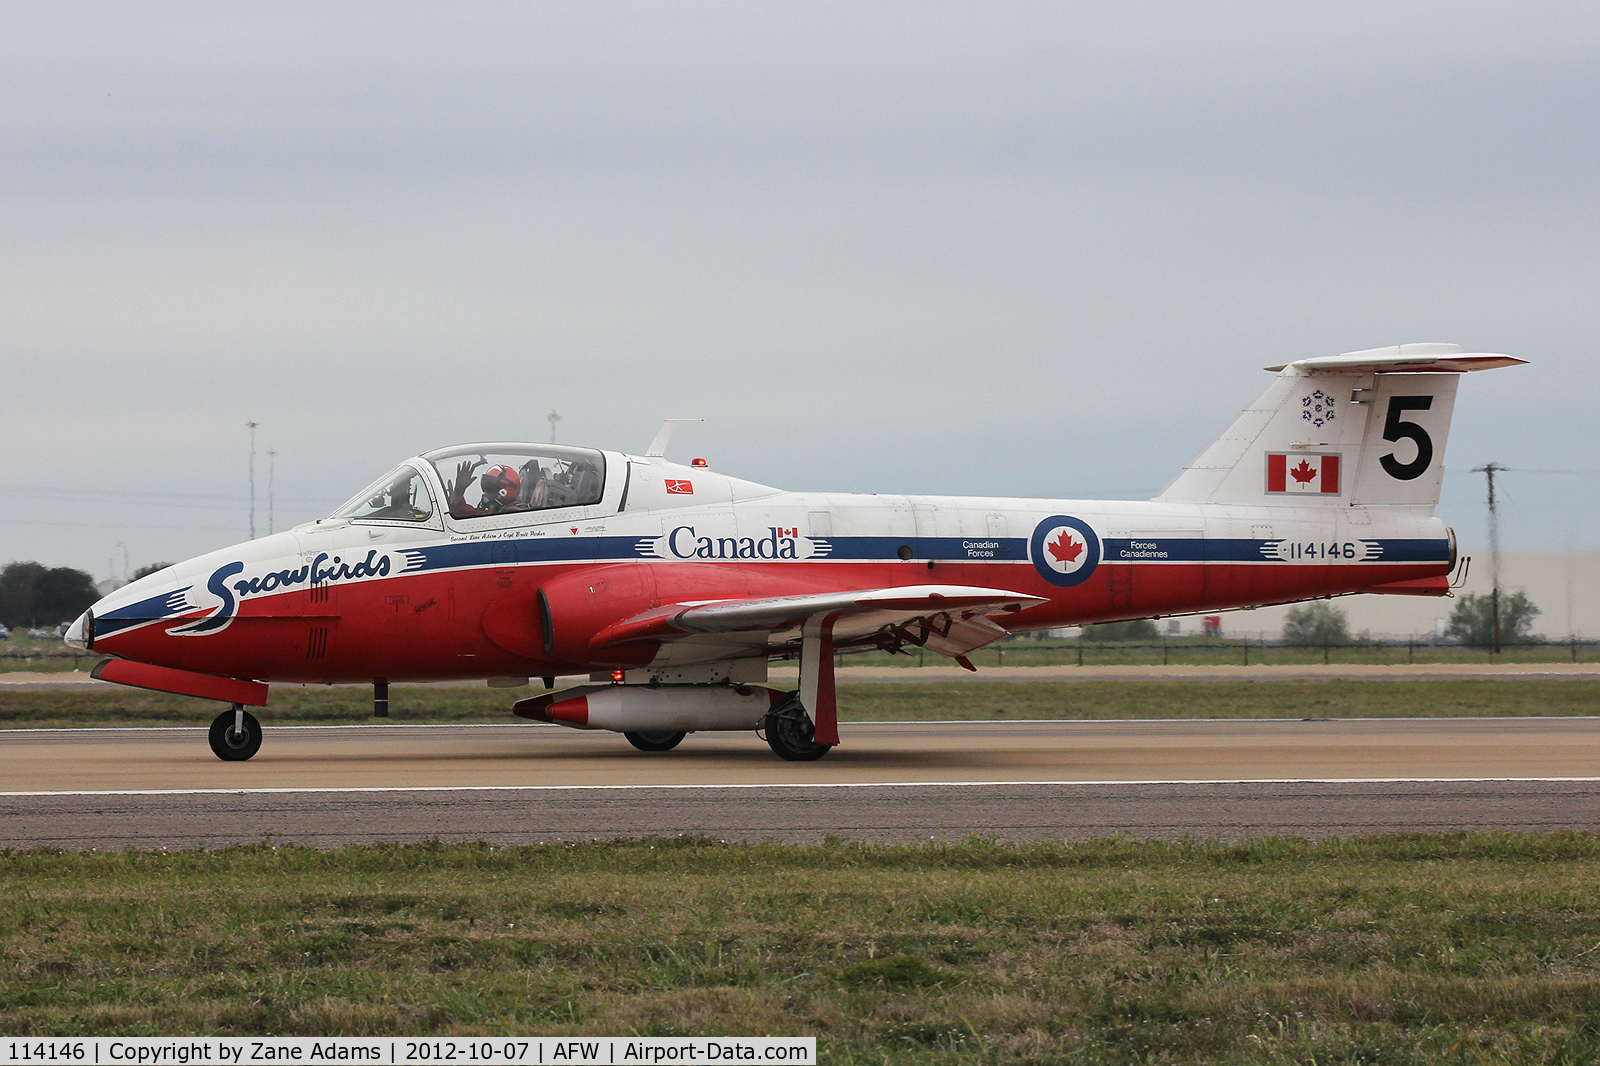 114146, Canadair CT-114 Tutor C/N 1146, At the 2012 Alliance Airshow - Fort Worth, TX